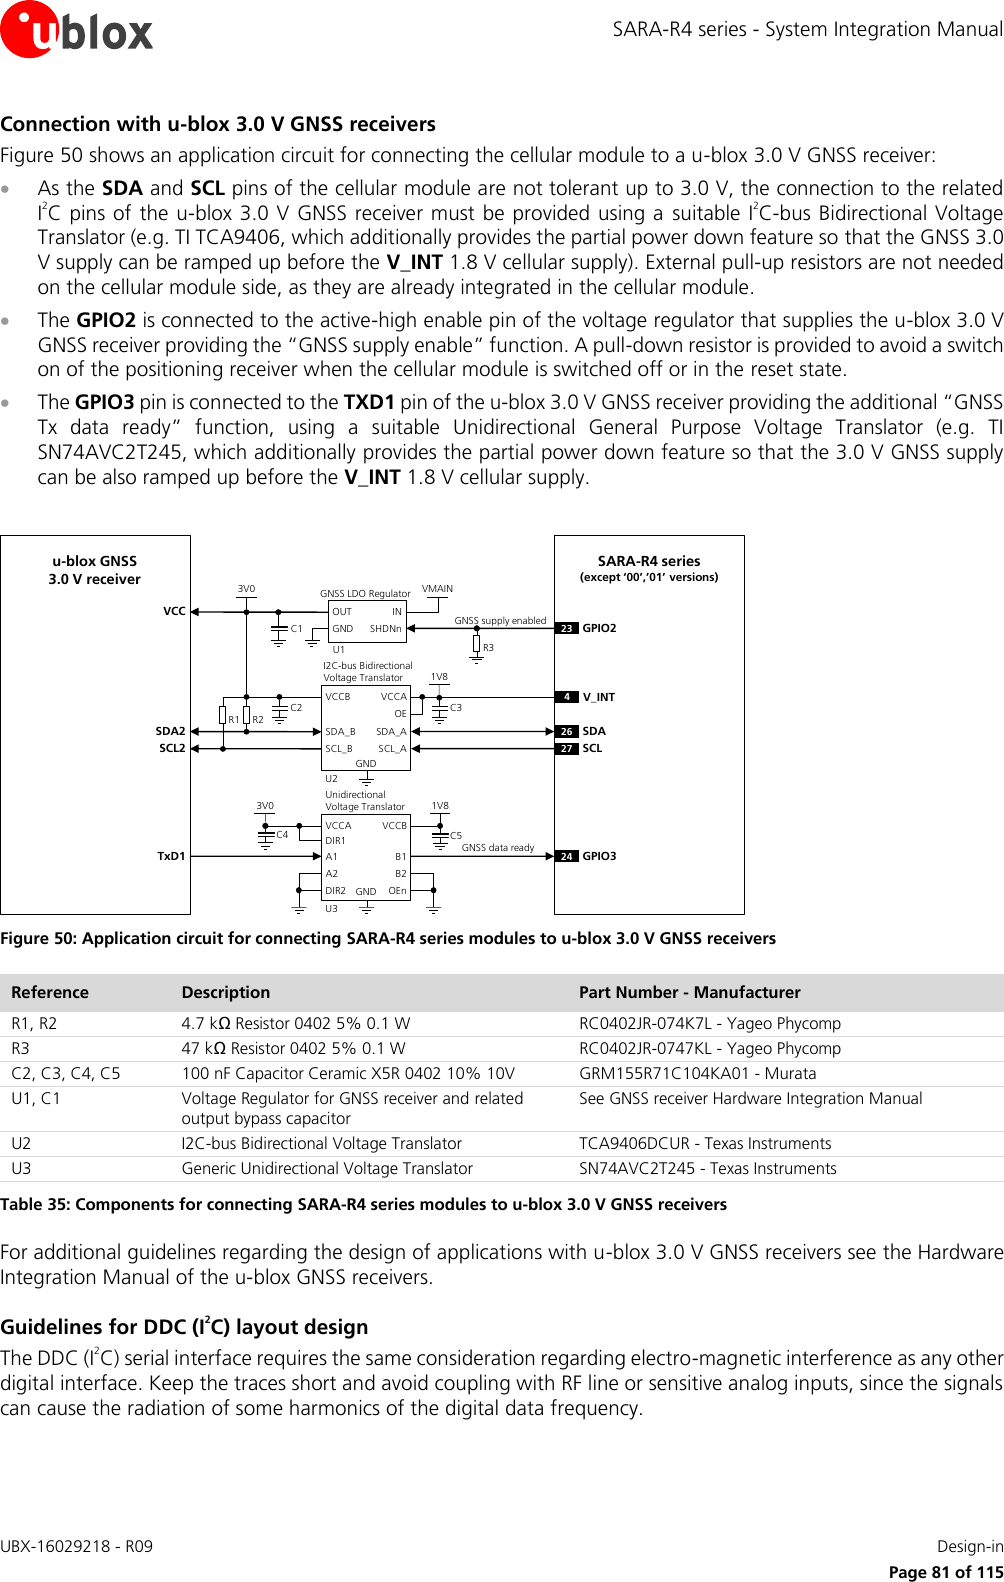 SARA-R4 series - System Integration Manual UBX-16029218 - R09    Design-in     Page 81 of 115 Connection with u-blox 3.0 V GNSS receivers Figure 50 shows an application circuit for connecting the cellular module to a u-blox 3.0 V GNSS receiver:  As the SDA and SCL pins of the cellular module are not tolerant up to 3.0 V, the connection to the related I2C pins of the u-blox 3.0 V GNSS receiver must be provided  using a  suitable I2C-bus Bidirectional Voltage Translator (e.g. TI TCA9406, which additionally provides the partial power down feature so that the GNSS 3.0 V supply can be ramped up before the V_INT 1.8 V cellular supply). External pull-up resistors are not needed on the cellular module side, as they are already integrated in the cellular module.  The GPIO2 is connected to the active-high enable pin of the voltage regulator that supplies the u-blox 3.0 V GNSS receiver providing the “GNSS supply enable” function. A pull-down resistor is provided to avoid a switch on of the positioning receiver when the cellular module is switched off or in the reset state.  The GPIO3 pin is connected to the TXD1 pin of the u-blox 3.0 V GNSS receiver providing the additional “GNSS Tx  data  ready”  function,  using  a  suitable  Unidirectional  General  Purpose  Voltage  Translator  (e.g.  TI SN74AVC2T245, which additionally provides the partial power down feature so that the 3.0 V GNSS supply can be also ramped up before the V_INT 1.8 V cellular supply.  u-blox GNSS 3.0 V receiver24 GPIO31V8B1 A1GNDU3B2A2VCCBVCCAUnidirectionalVoltage TranslatorC4 C53V0TxD1R1INOUTGNSS LDO RegulatorSHDNnR2VMAIN3V0U123 GPIO226 SDA27 SCL1V8SDA_A SDA_BGNDU2SCL_ASCL_BVCCAVCCBI2C-bus Bidirectional Voltage Translator4V_INTC1C2 C3R3SDA2SCL2VCCDIR1DIR2 OEnOEGNSS data readyGNSS supply enabledGNDSARA-R4 series(except ‘00’,’01’ versions) Figure 50: Application circuit for connecting SARA-R4 series modules to u-blox 3.0 V GNSS receivers Reference Description Part Number - Manufacturer R1, R2 4.7 kΩ Resistor 0402 5% 0.1 W  RC0402JR-074K7L - Yageo Phycomp R3 47 kΩ Resistor 0402 5% 0.1 W  RC0402JR-0747KL - Yageo Phycomp C2, C3, C4, C5 100 nF Capacitor Ceramic X5R 0402 10% 10V GRM155R71C104KA01 - Murata U1, C1 Voltage Regulator for GNSS receiver and related output bypass capacitor See GNSS receiver Hardware Integration Manual U2 I2C-bus Bidirectional Voltage Translator TCA9406DCUR - Texas Instruments U3 Generic Unidirectional Voltage Translator SN74AVC2T245 - Texas Instruments Table 35: Components for connecting SARA-R4 series modules to u-blox 3.0 V GNSS receivers For additional guidelines regarding the design of applications with u-blox 3.0 V GNSS receivers see the Hardware Integration Manual of the u-blox GNSS receivers. Guidelines for DDC (I2C) layout design The DDC (I2C) serial interface requires the same consideration regarding electro-magnetic interference as any other digital interface. Keep the traces short and avoid coupling with RF line or sensitive analog inputs, since the signals can cause the radiation of some harmonics of the digital data frequency.  